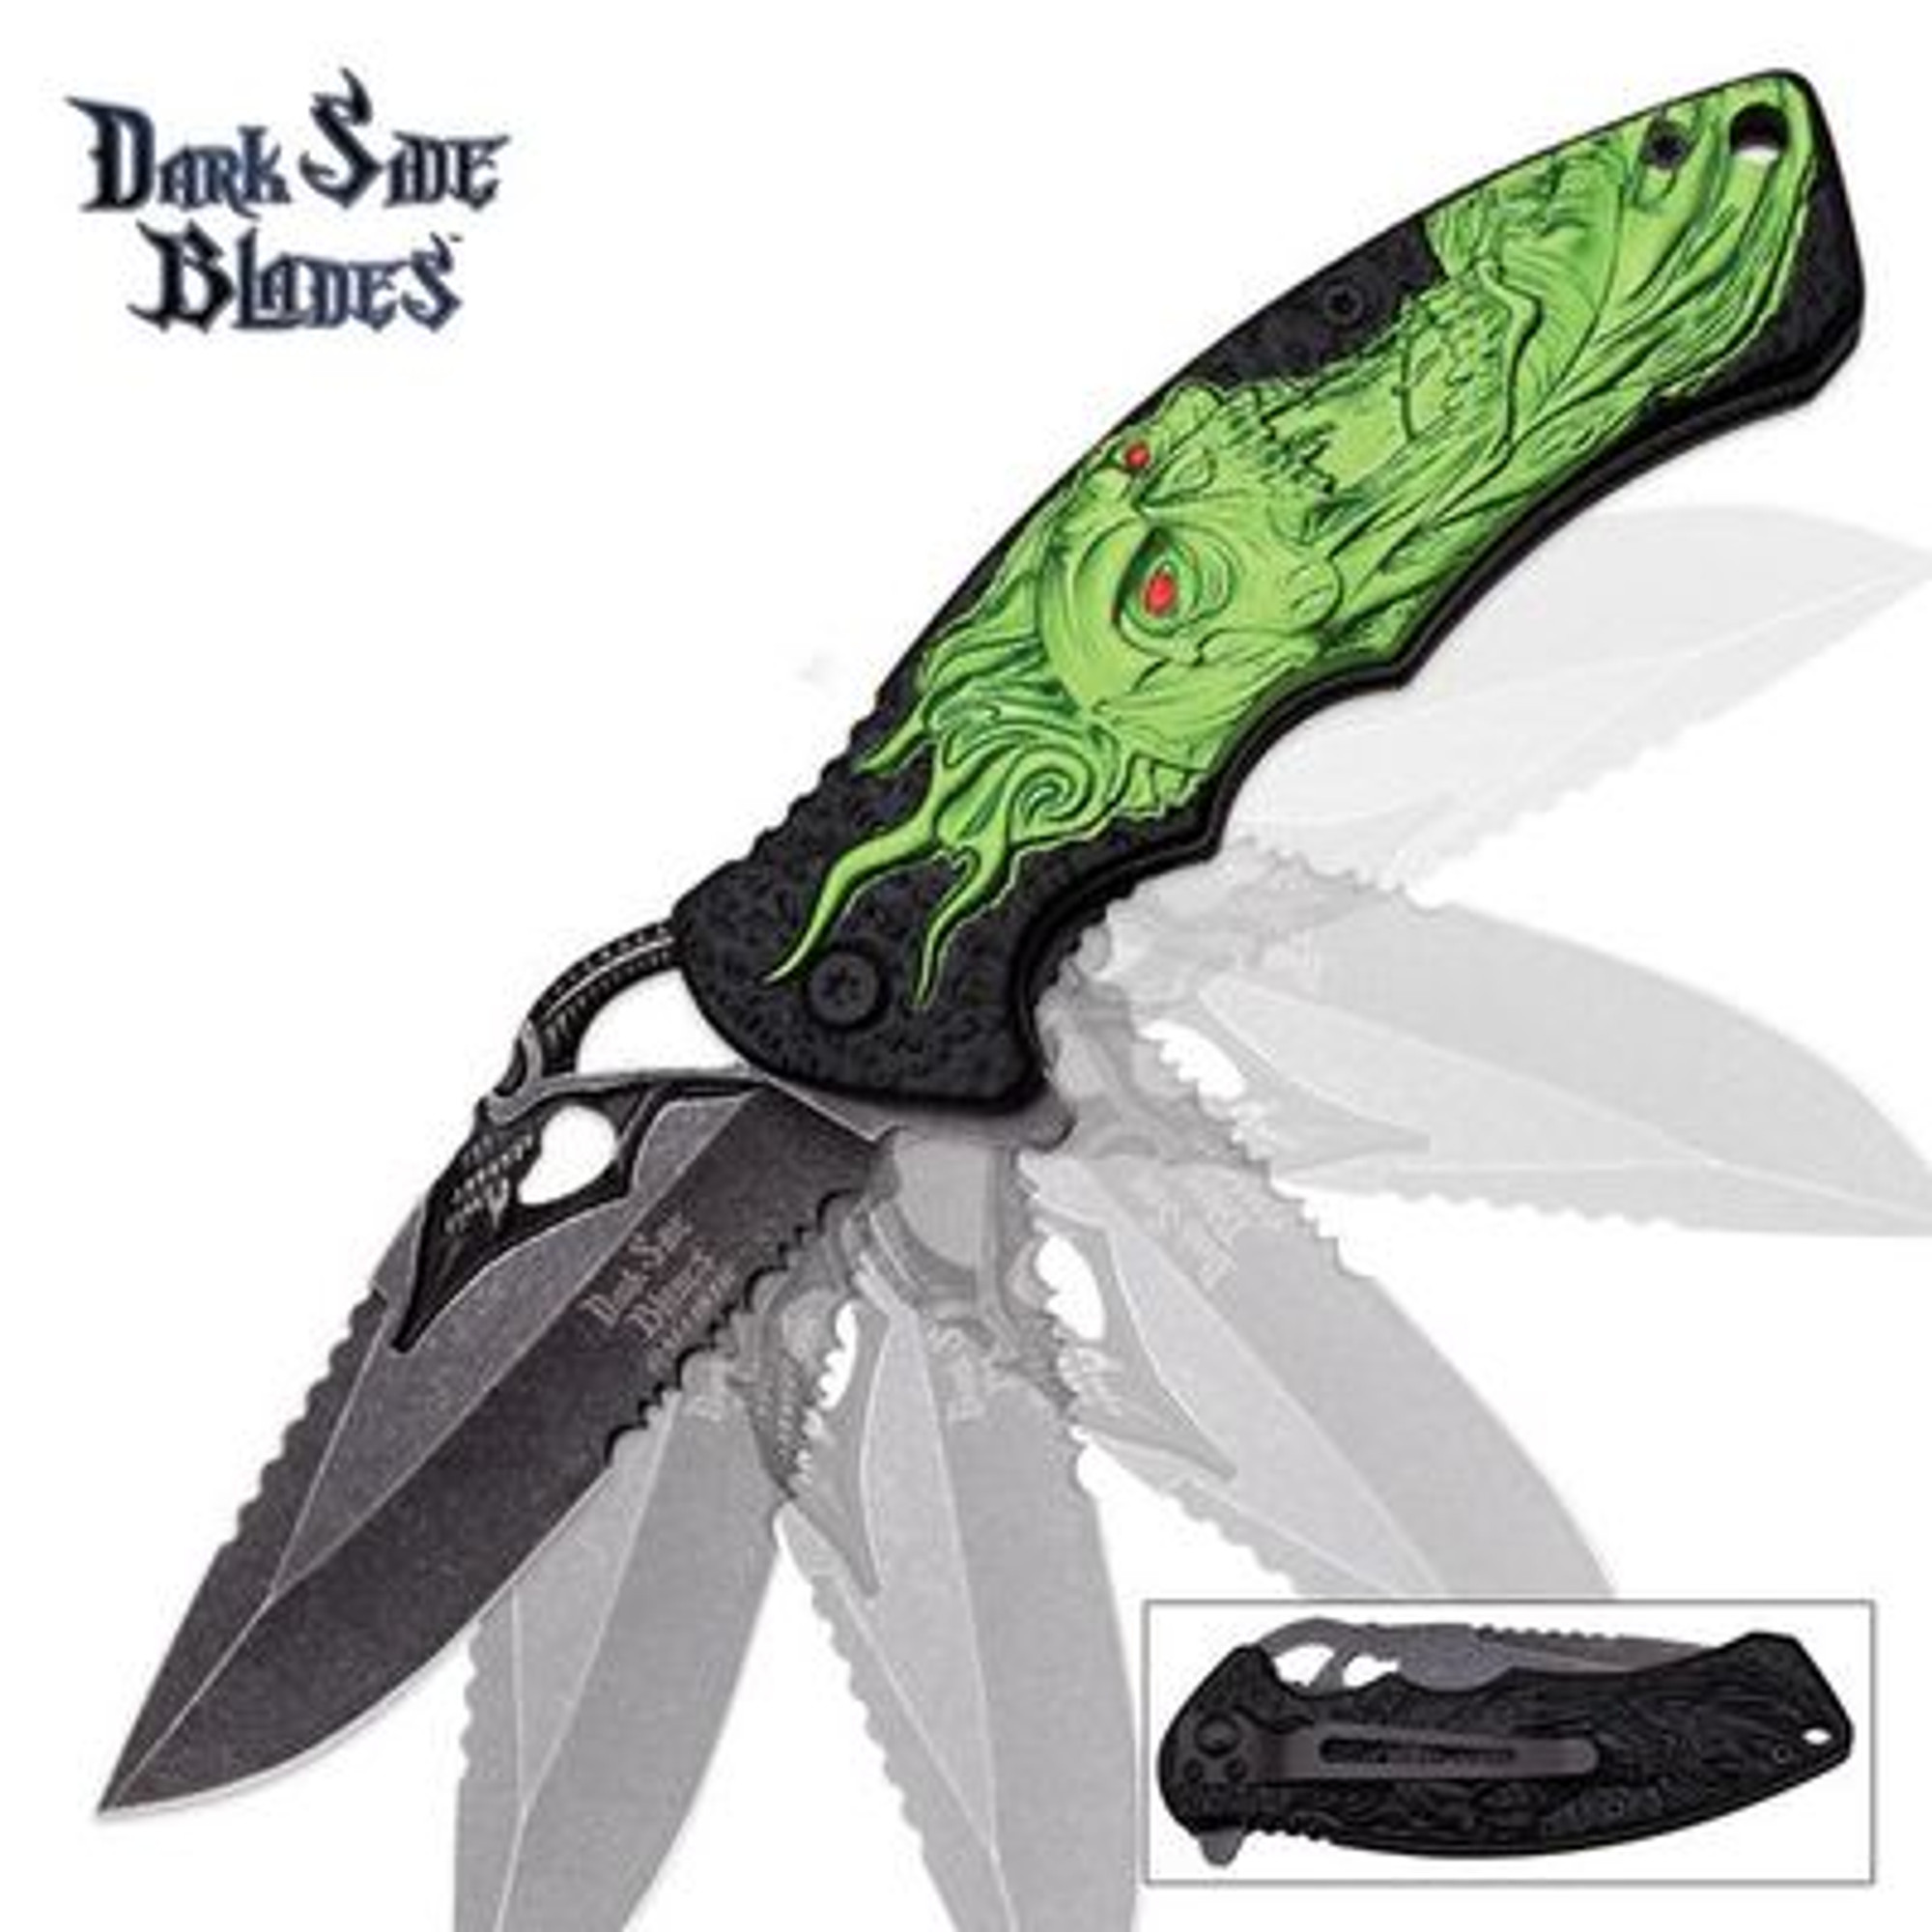 Angry Skull Spring-Assisted Folding Knife - Green